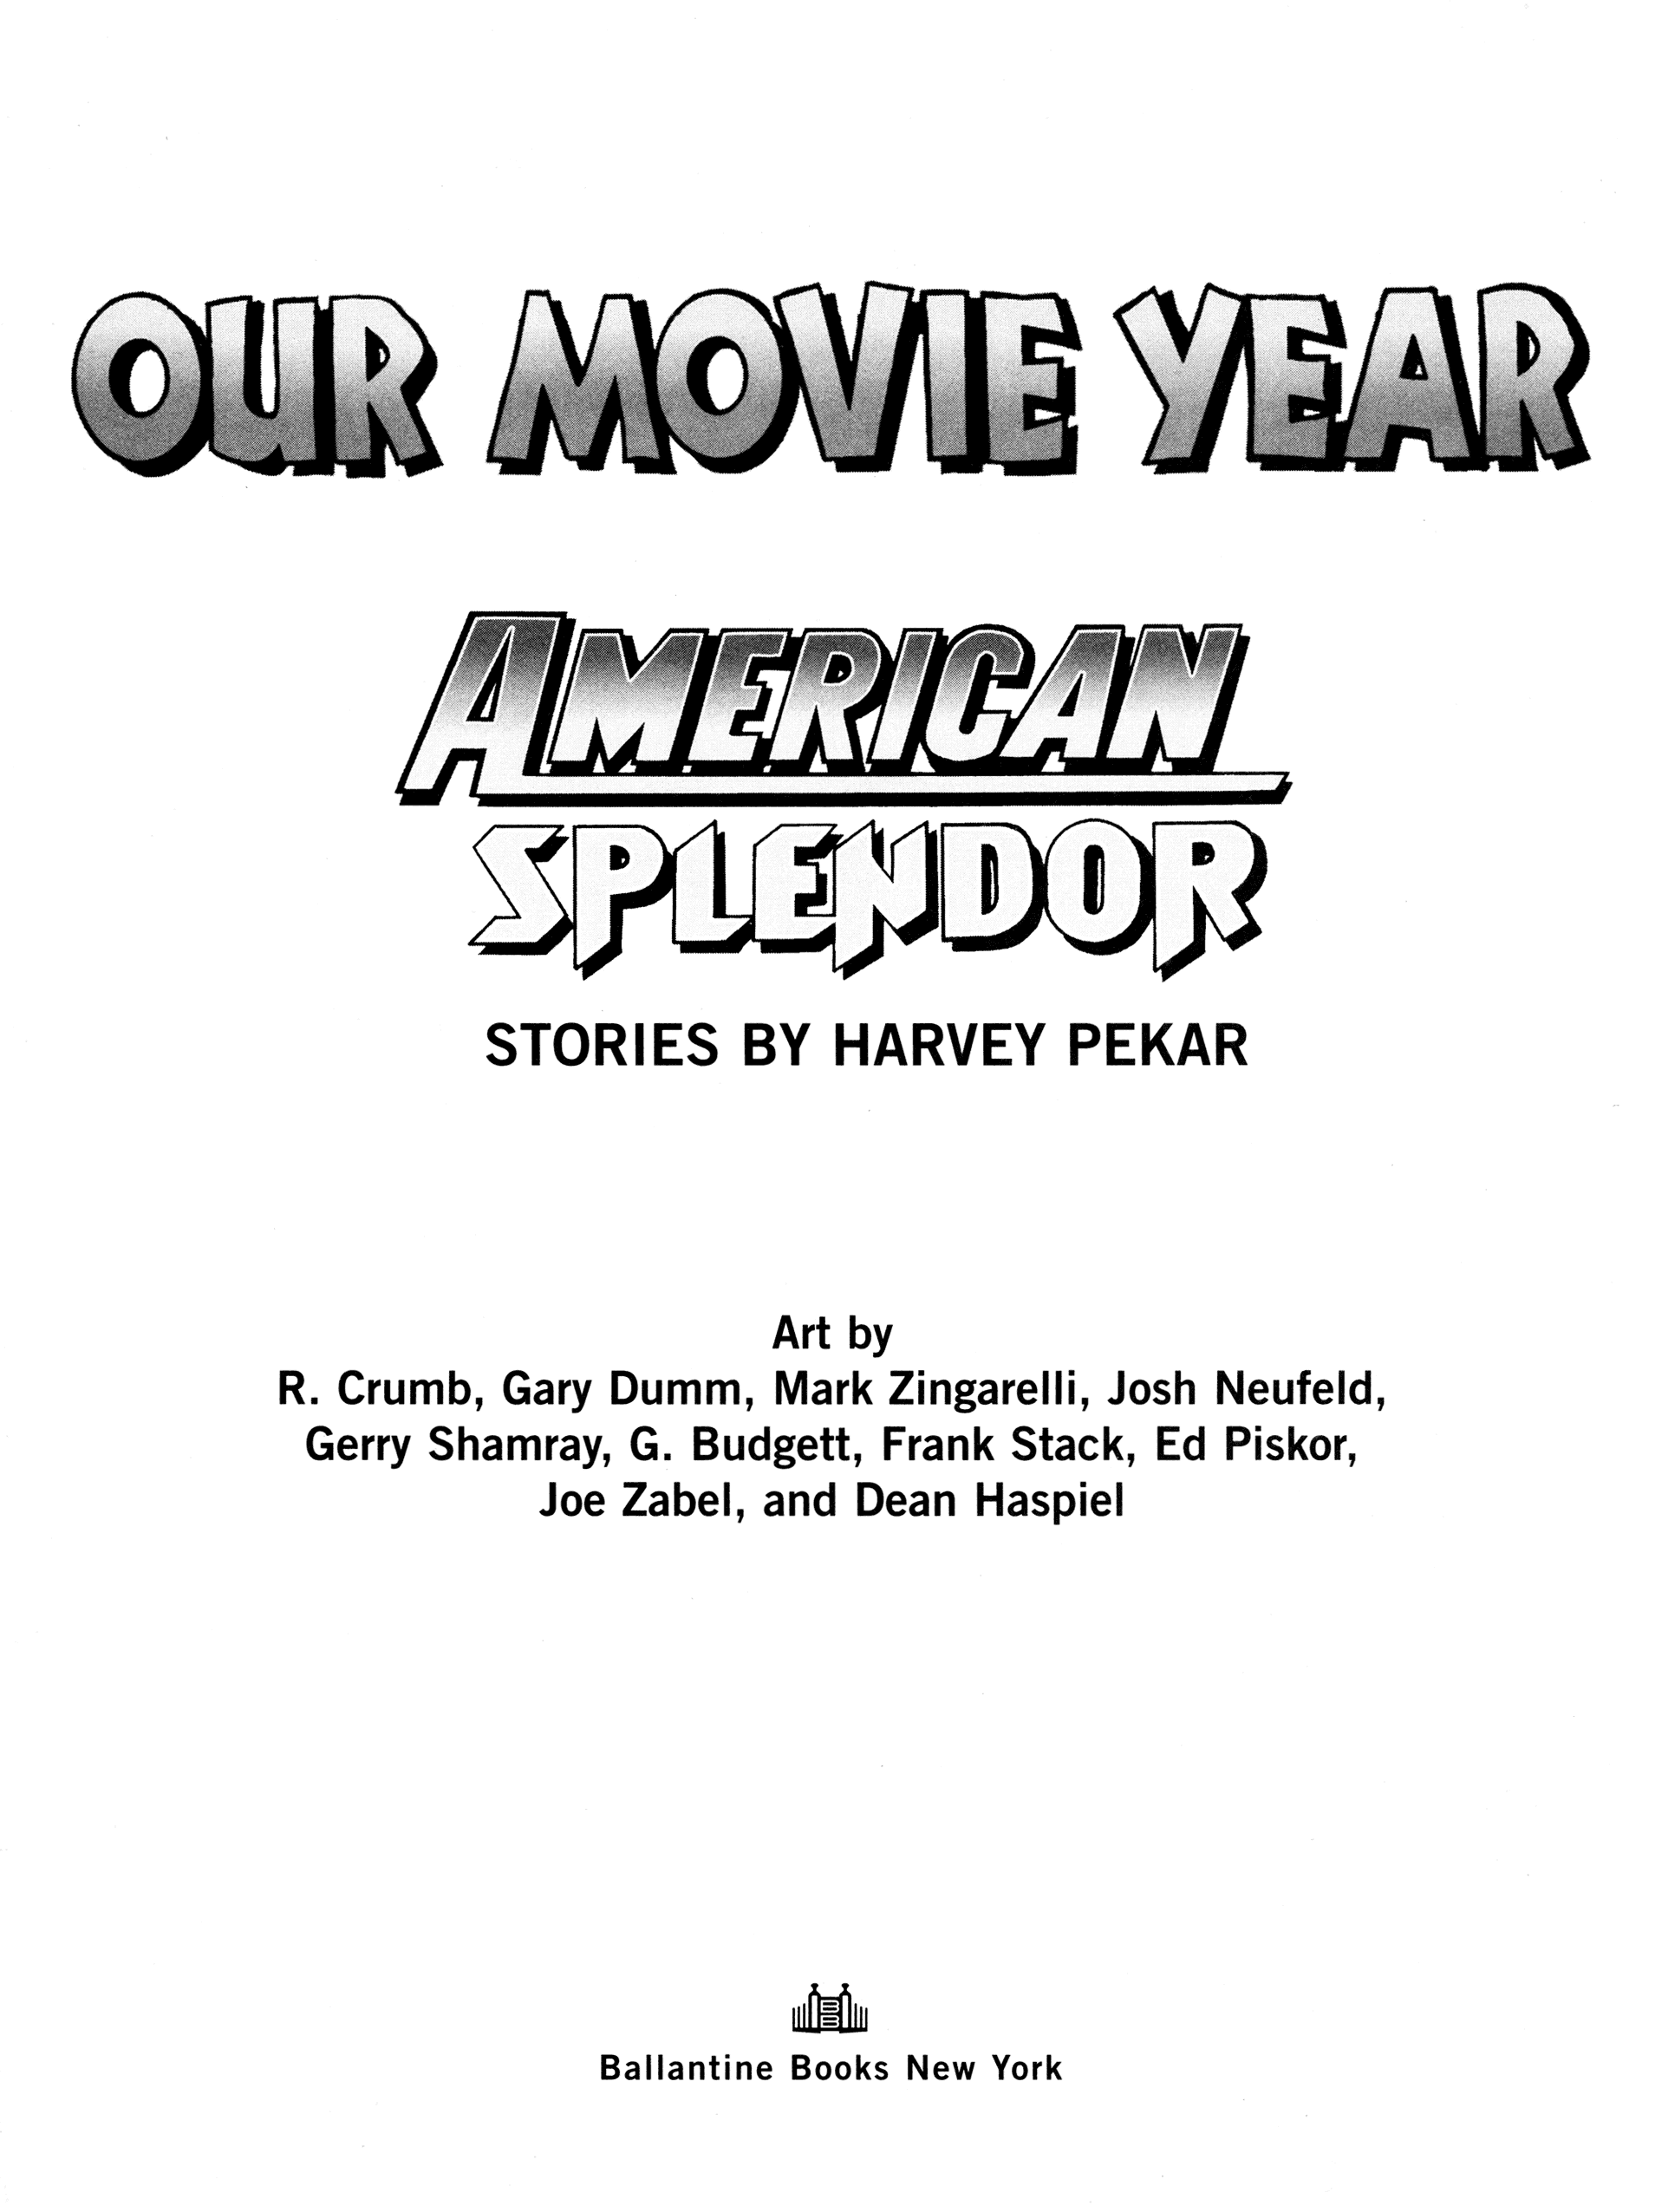 Read online American Splendor: Our Movie Year comic -  Issue # TPB (Part 1) - 3